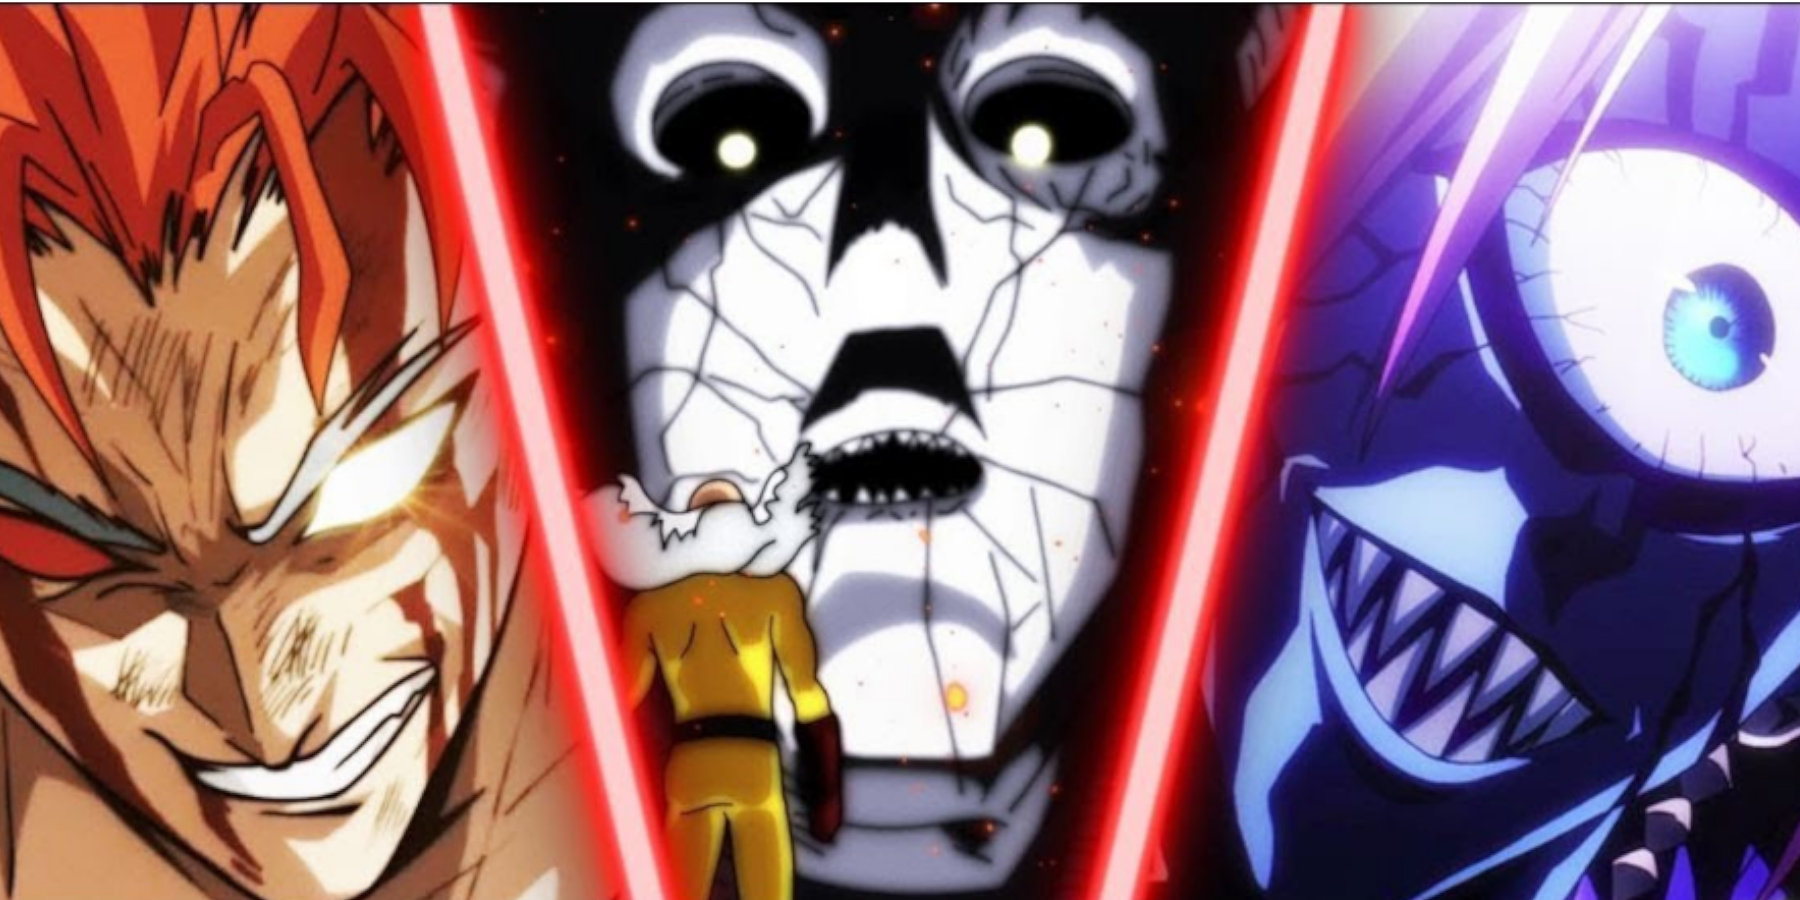 One Punch Man Second Season Episode 10 Review – Anime Rants